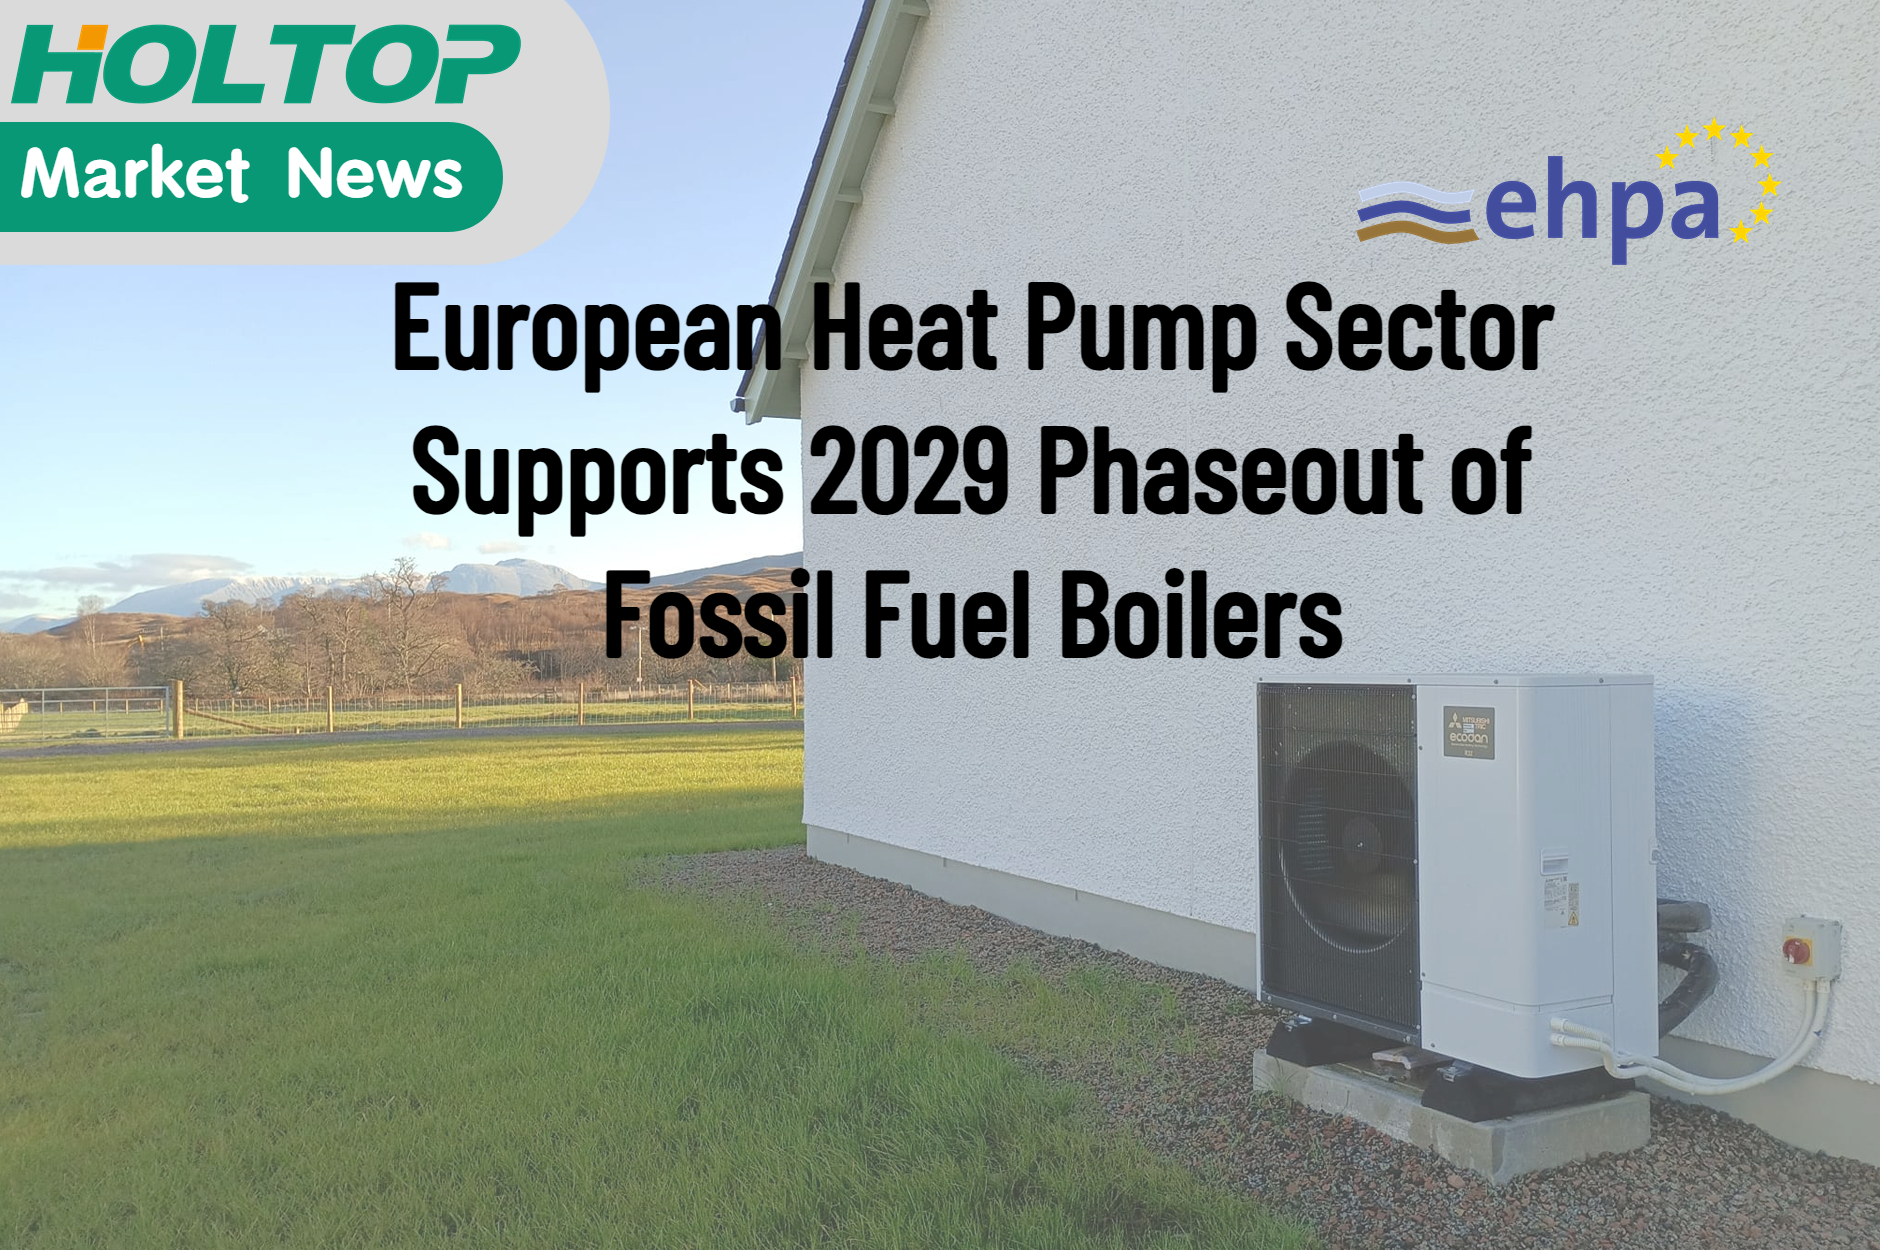 European Heat Pump Sector Supports 2029 Phaseout of Fossil Fuel Boilers